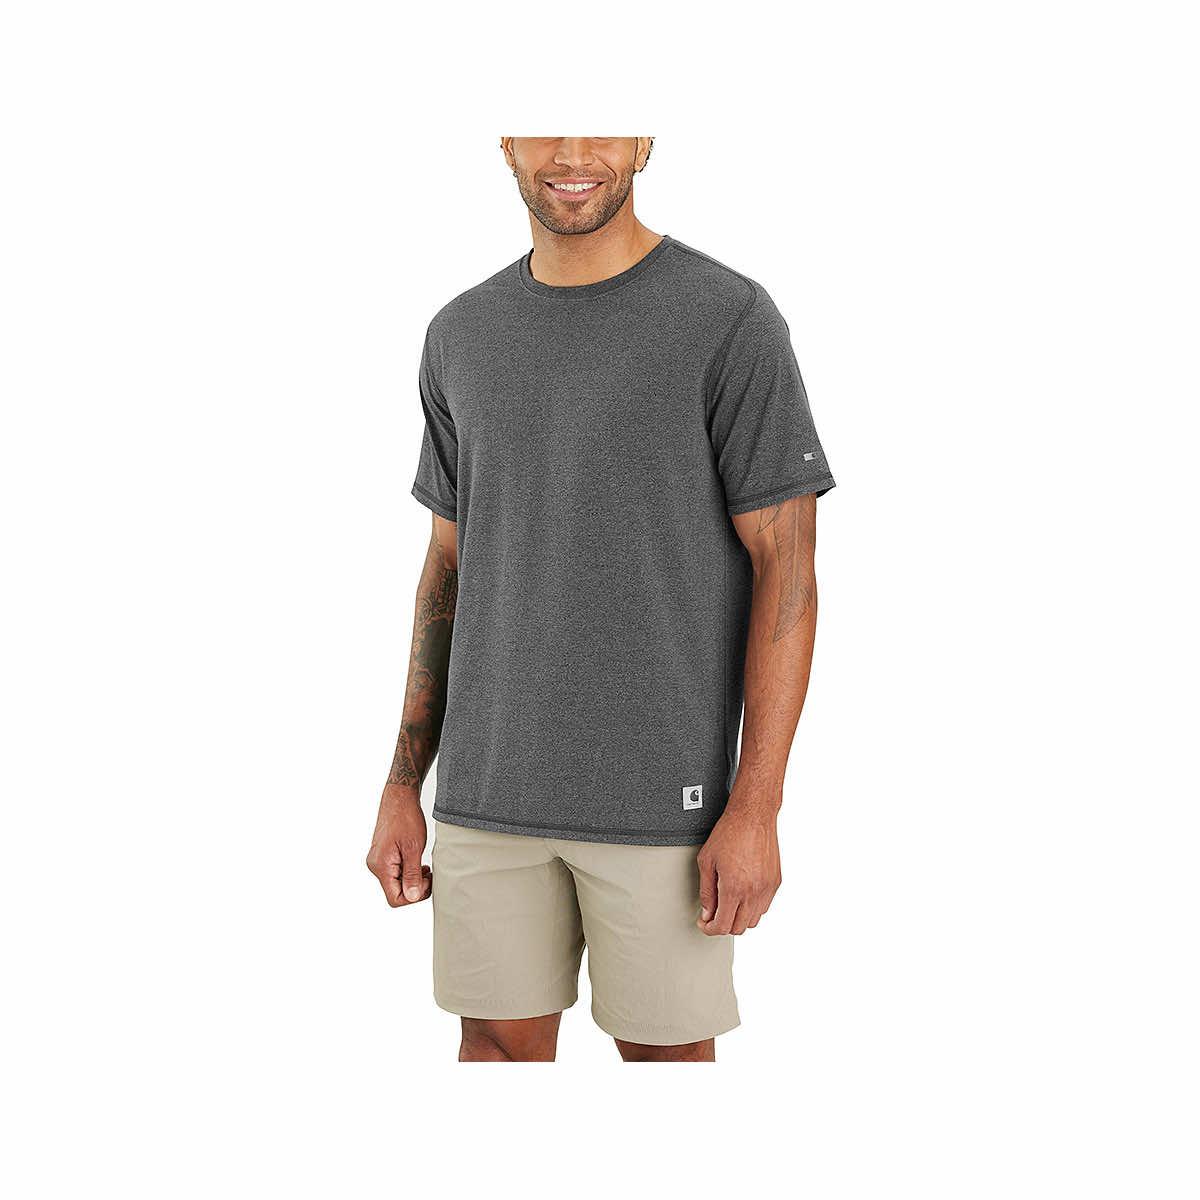 L.L.Bean Carefree Unshrinkable Tee with Pocket Short Sleeve Men's Clothing Gray Heather : XL